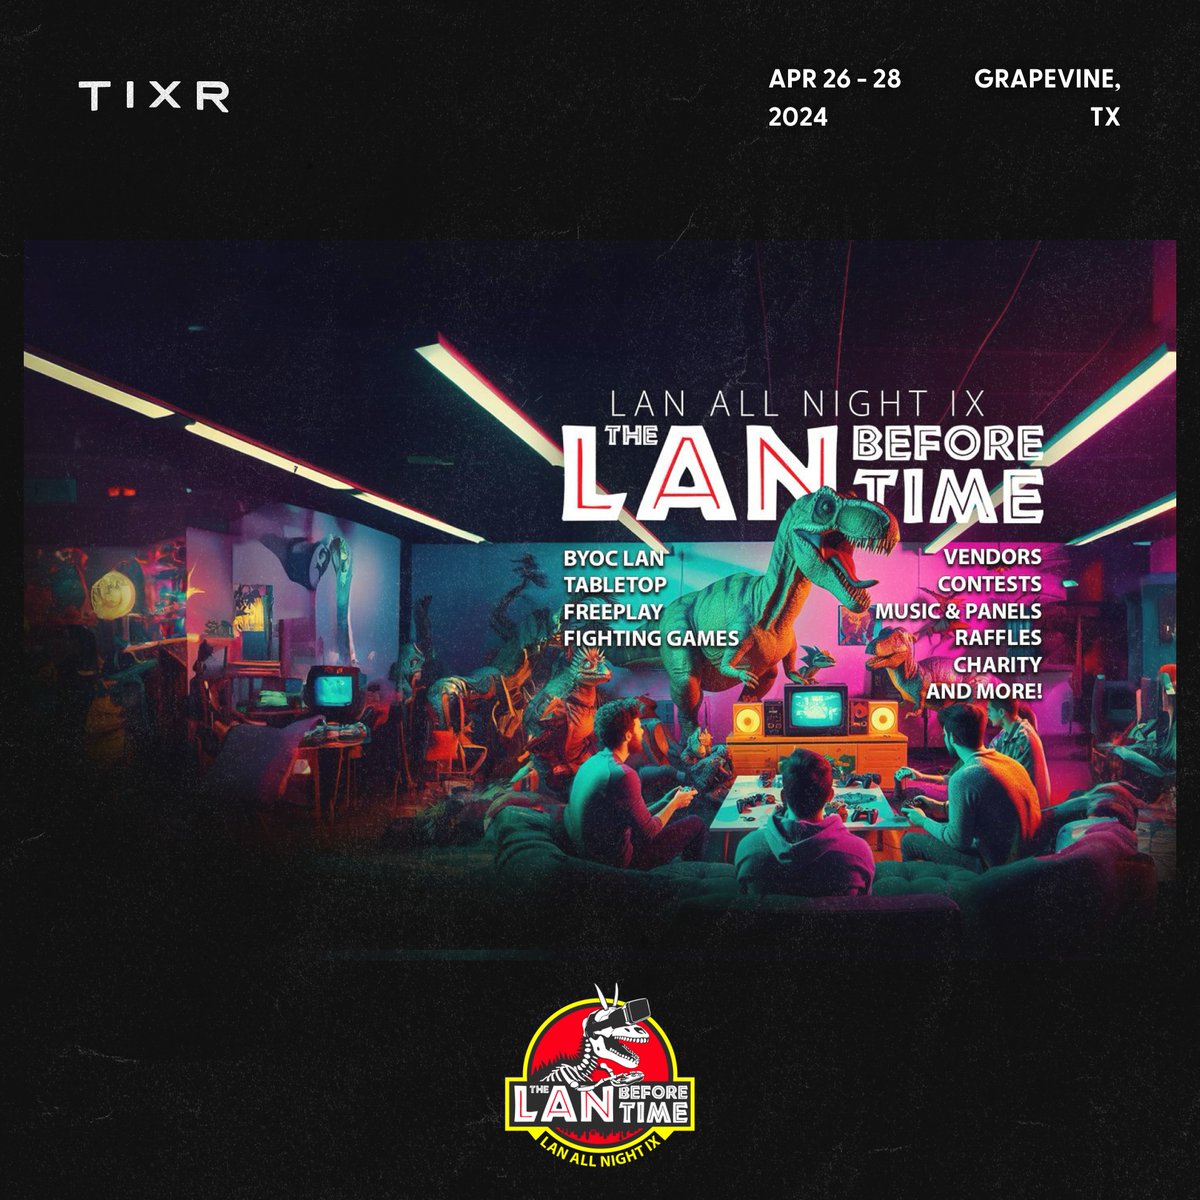 LAN All Night IX: The LAN Before Time is taking over the Great Wolf Lodge in Grapevine, TX as everyone from hardcore gamers to families seeking a weekend of dinosaur-themed fun converge for this charity event. From April 26 - 28, the event is leveling up their gaming experience